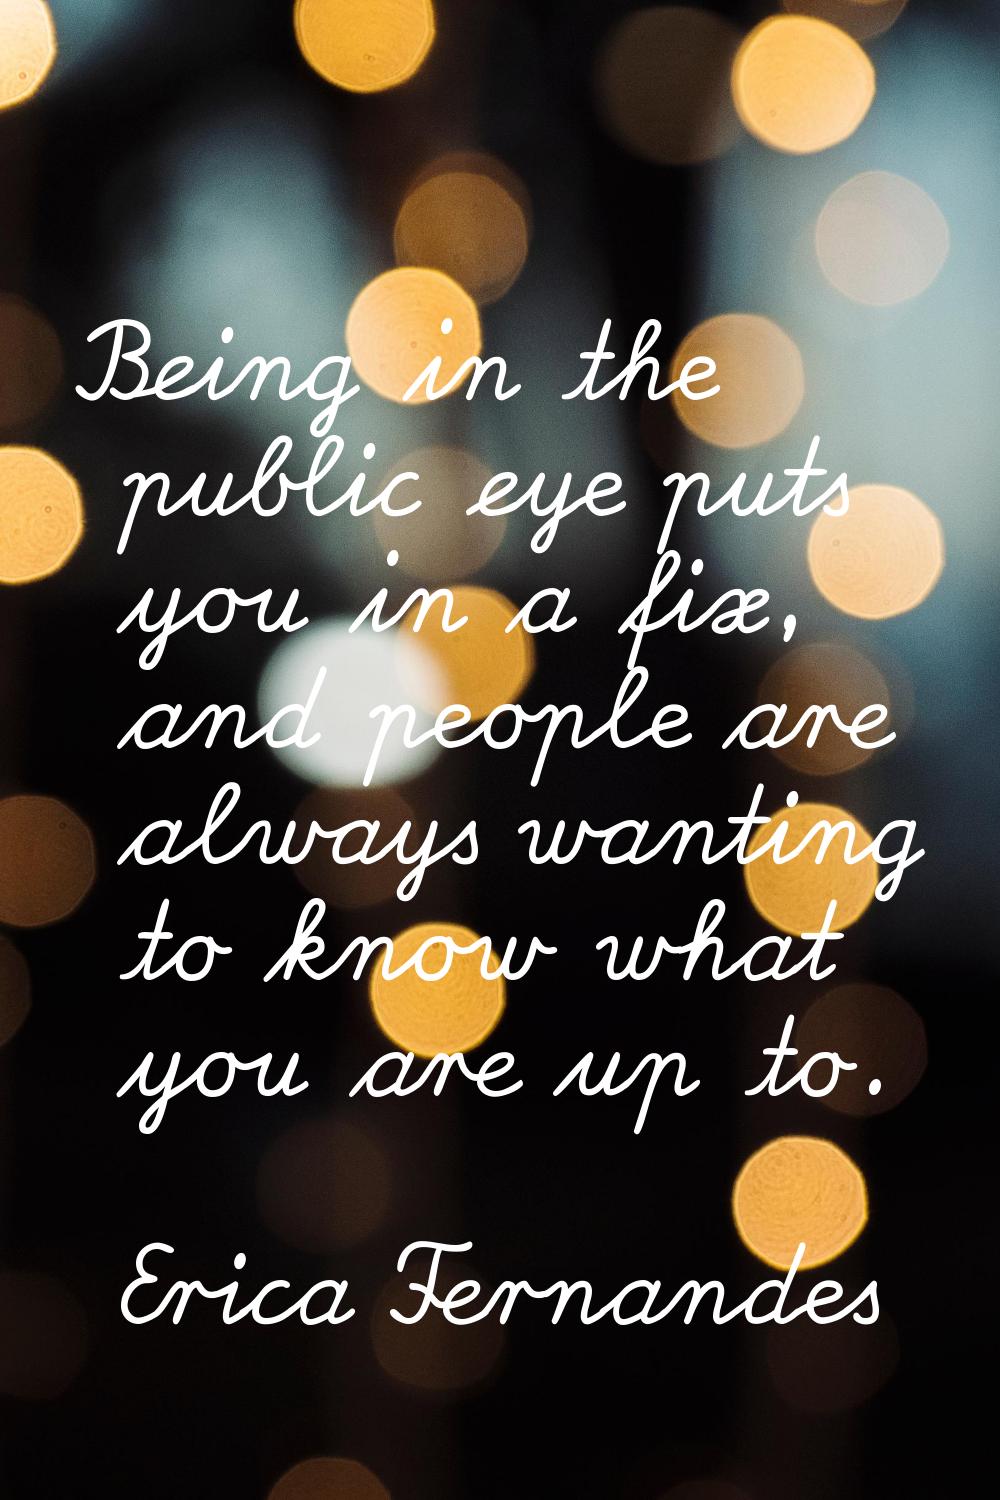 Being in the public eye puts you in a fix, and people are always wanting to know what you are up to